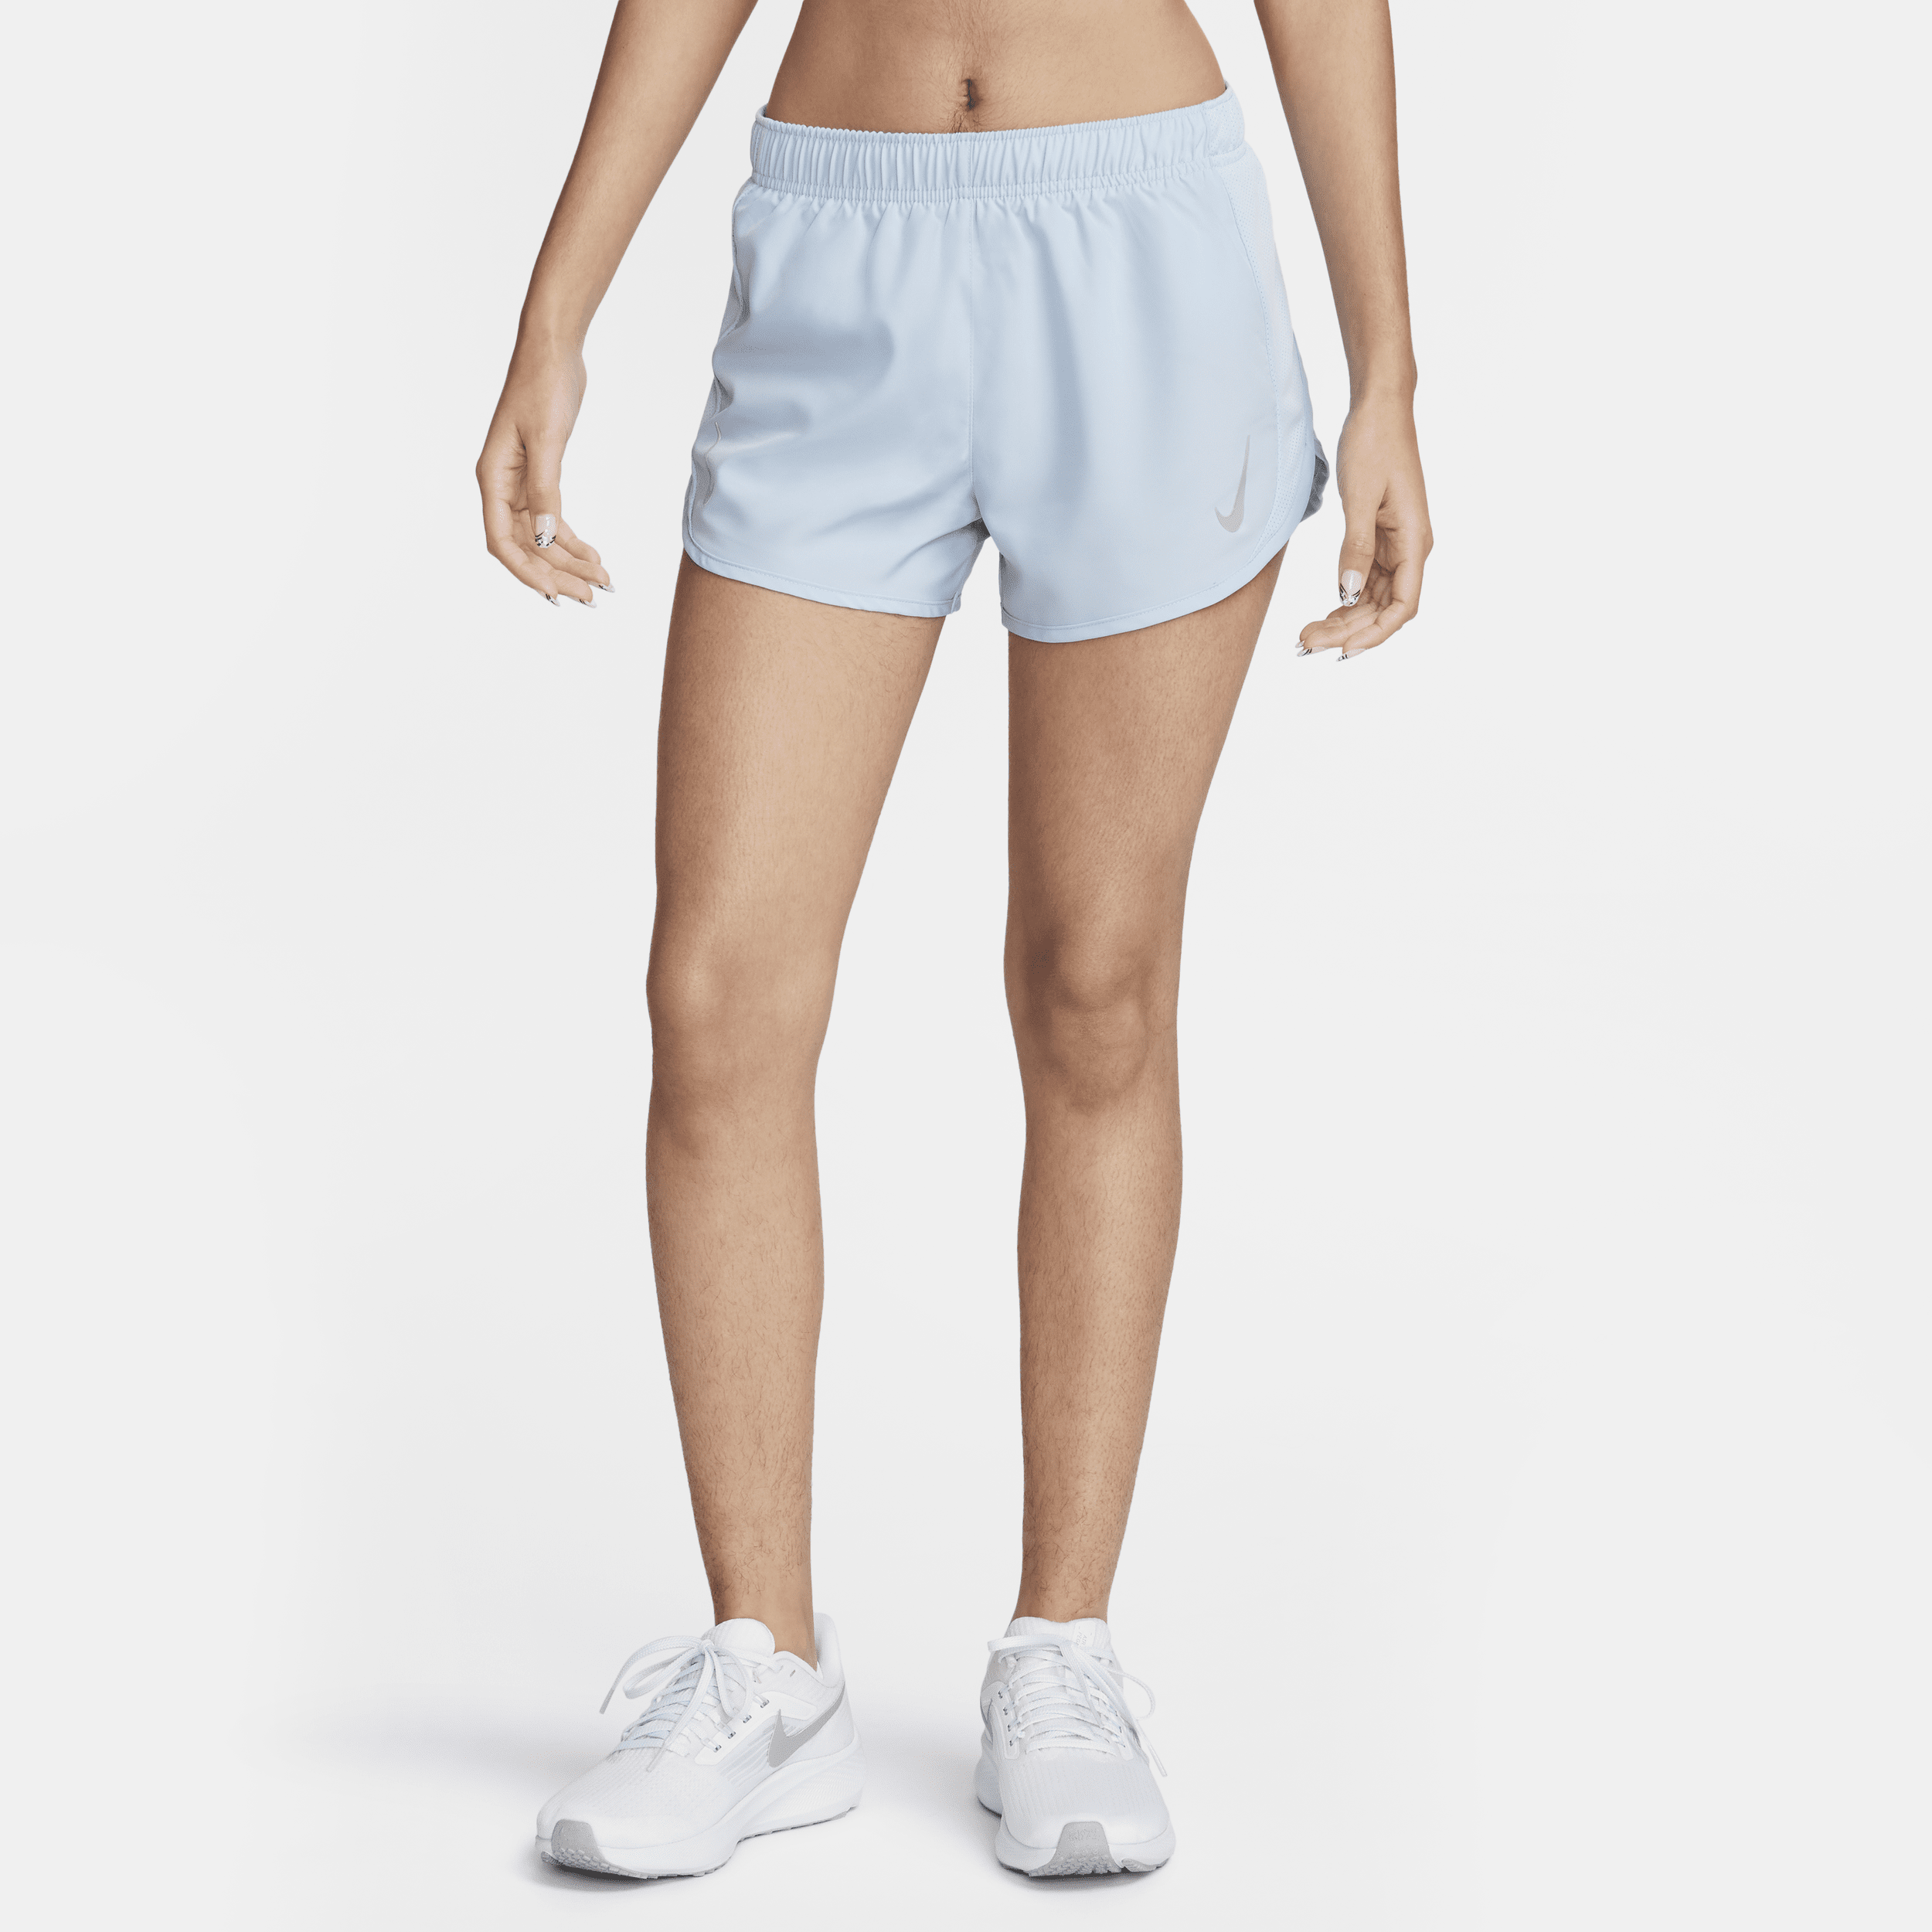 Nike Fast Tempo Dri-FIT hardloopshorts voor dames - Blauw